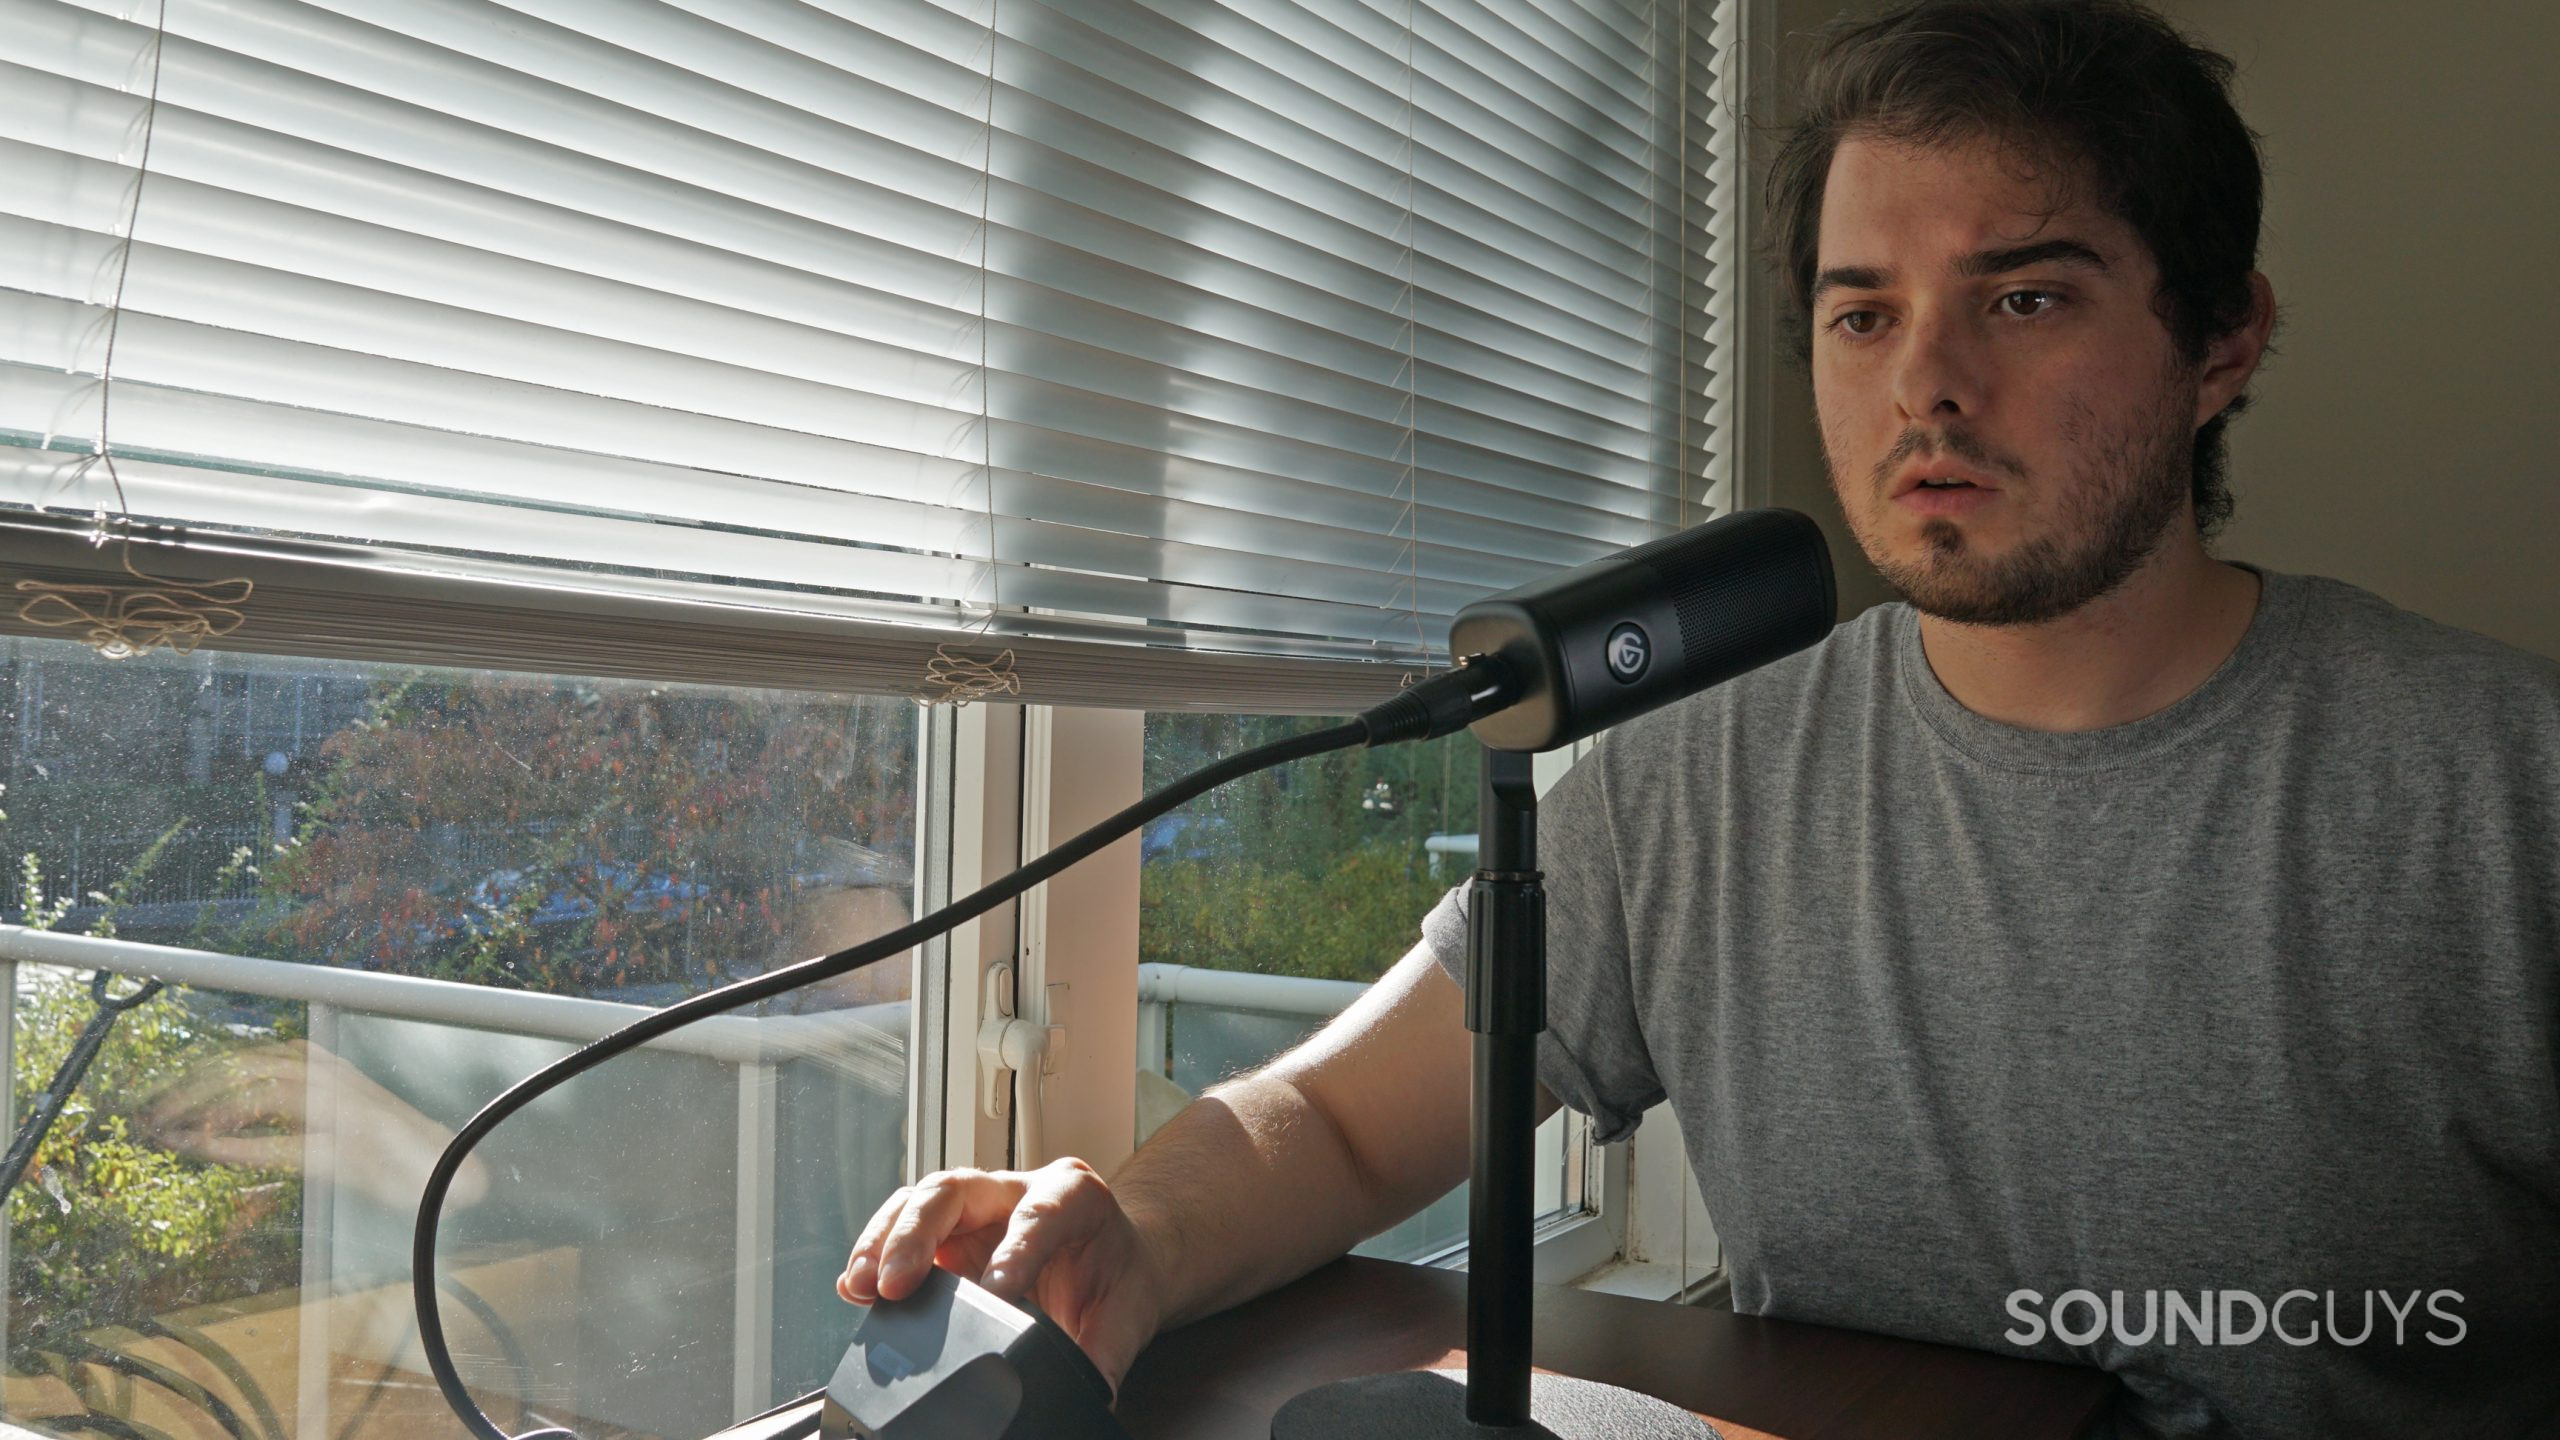 A man stands next to a window and speaks into the Elgato Wave DX microphone, with a hand on the Elgato Wave DX.